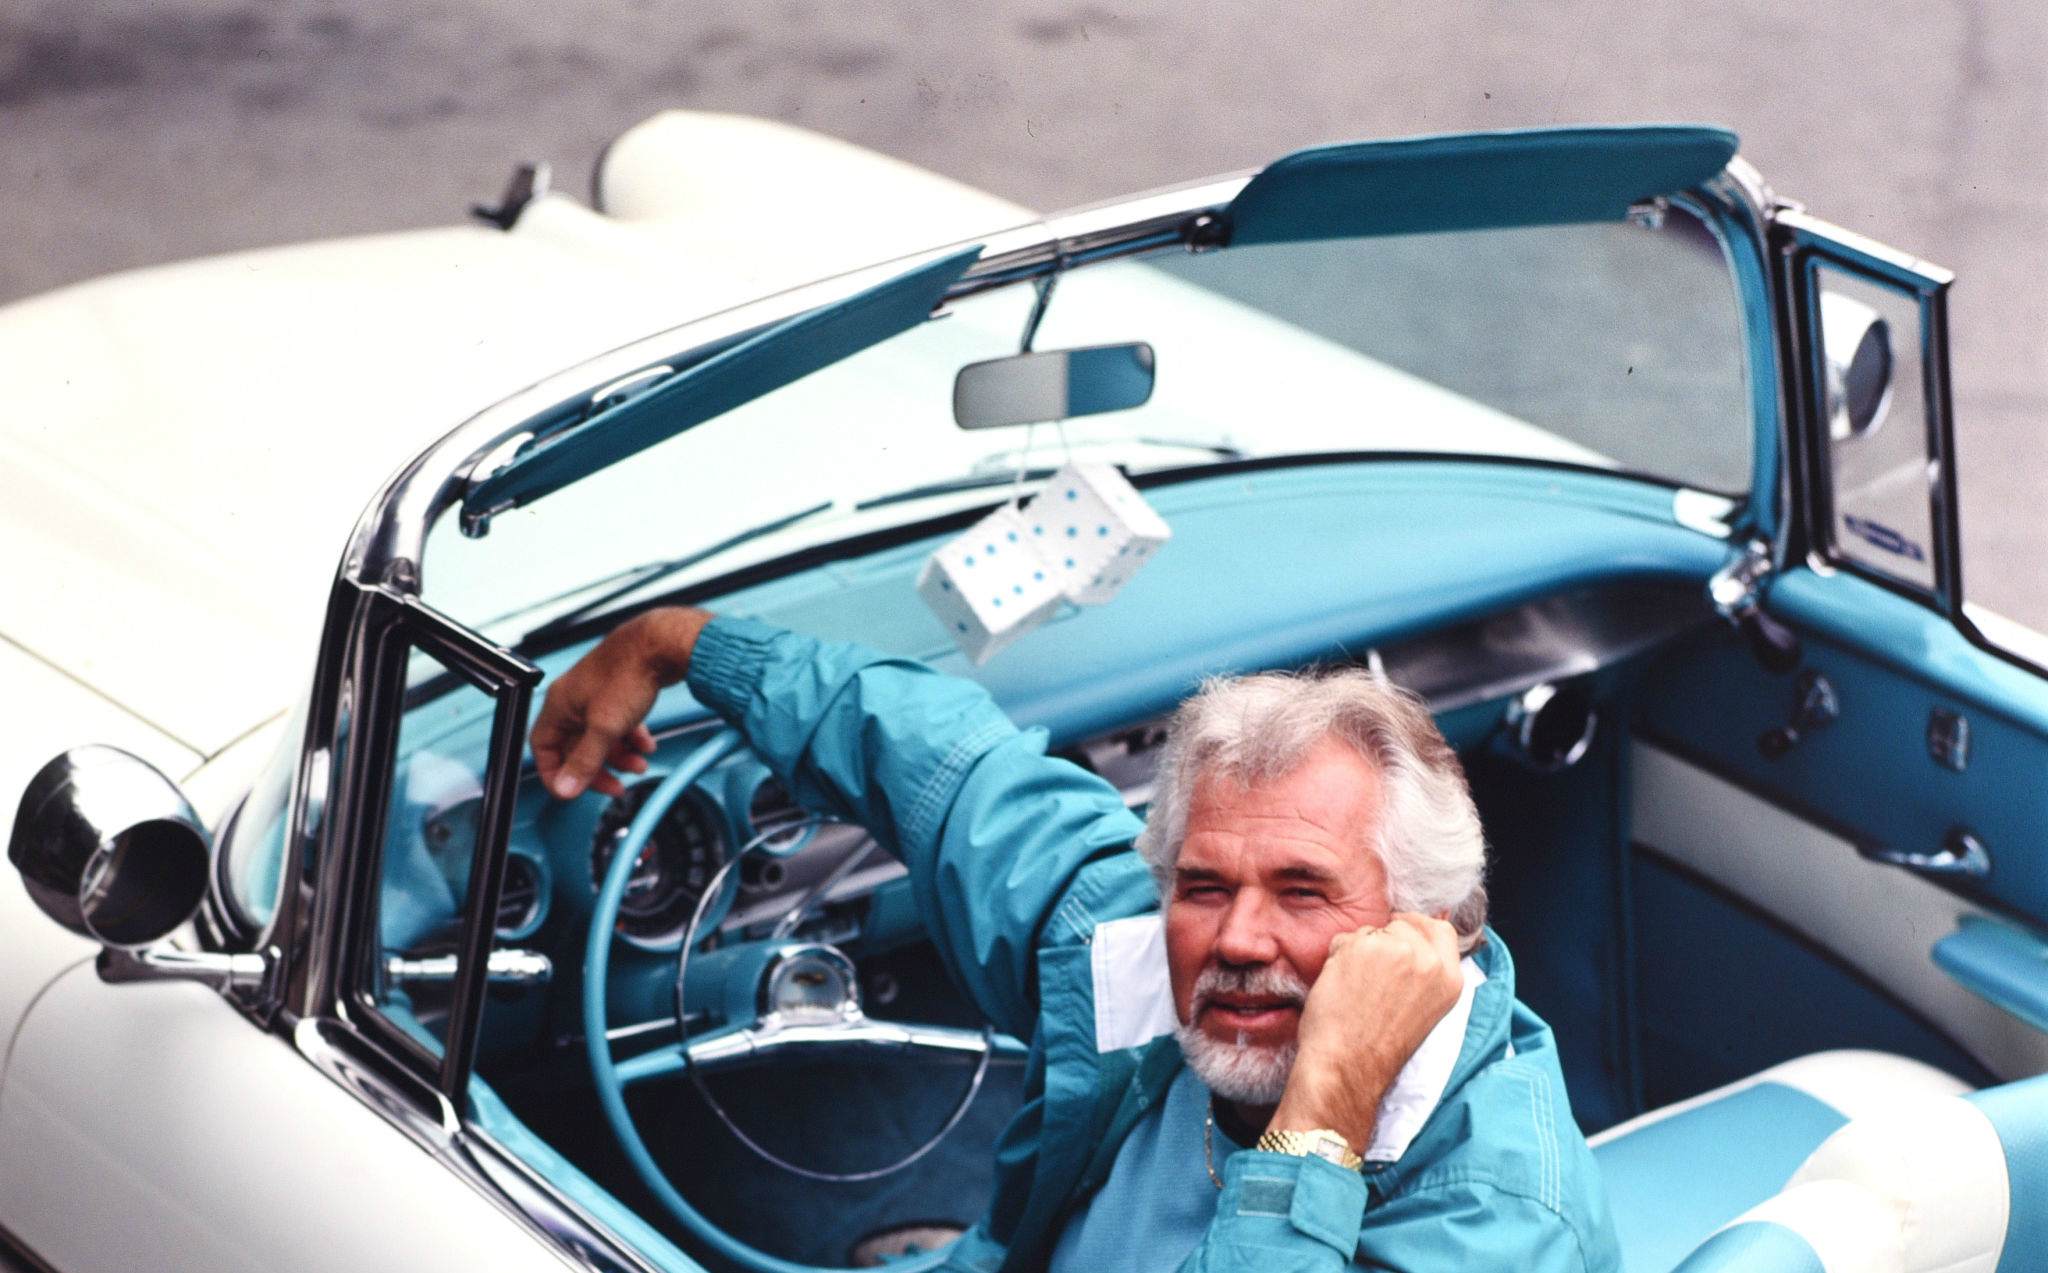     Kenny Rogers and his 1957 convertible Cadillac on January 15, 1990 in Beverly Hills, Los Angeles, California